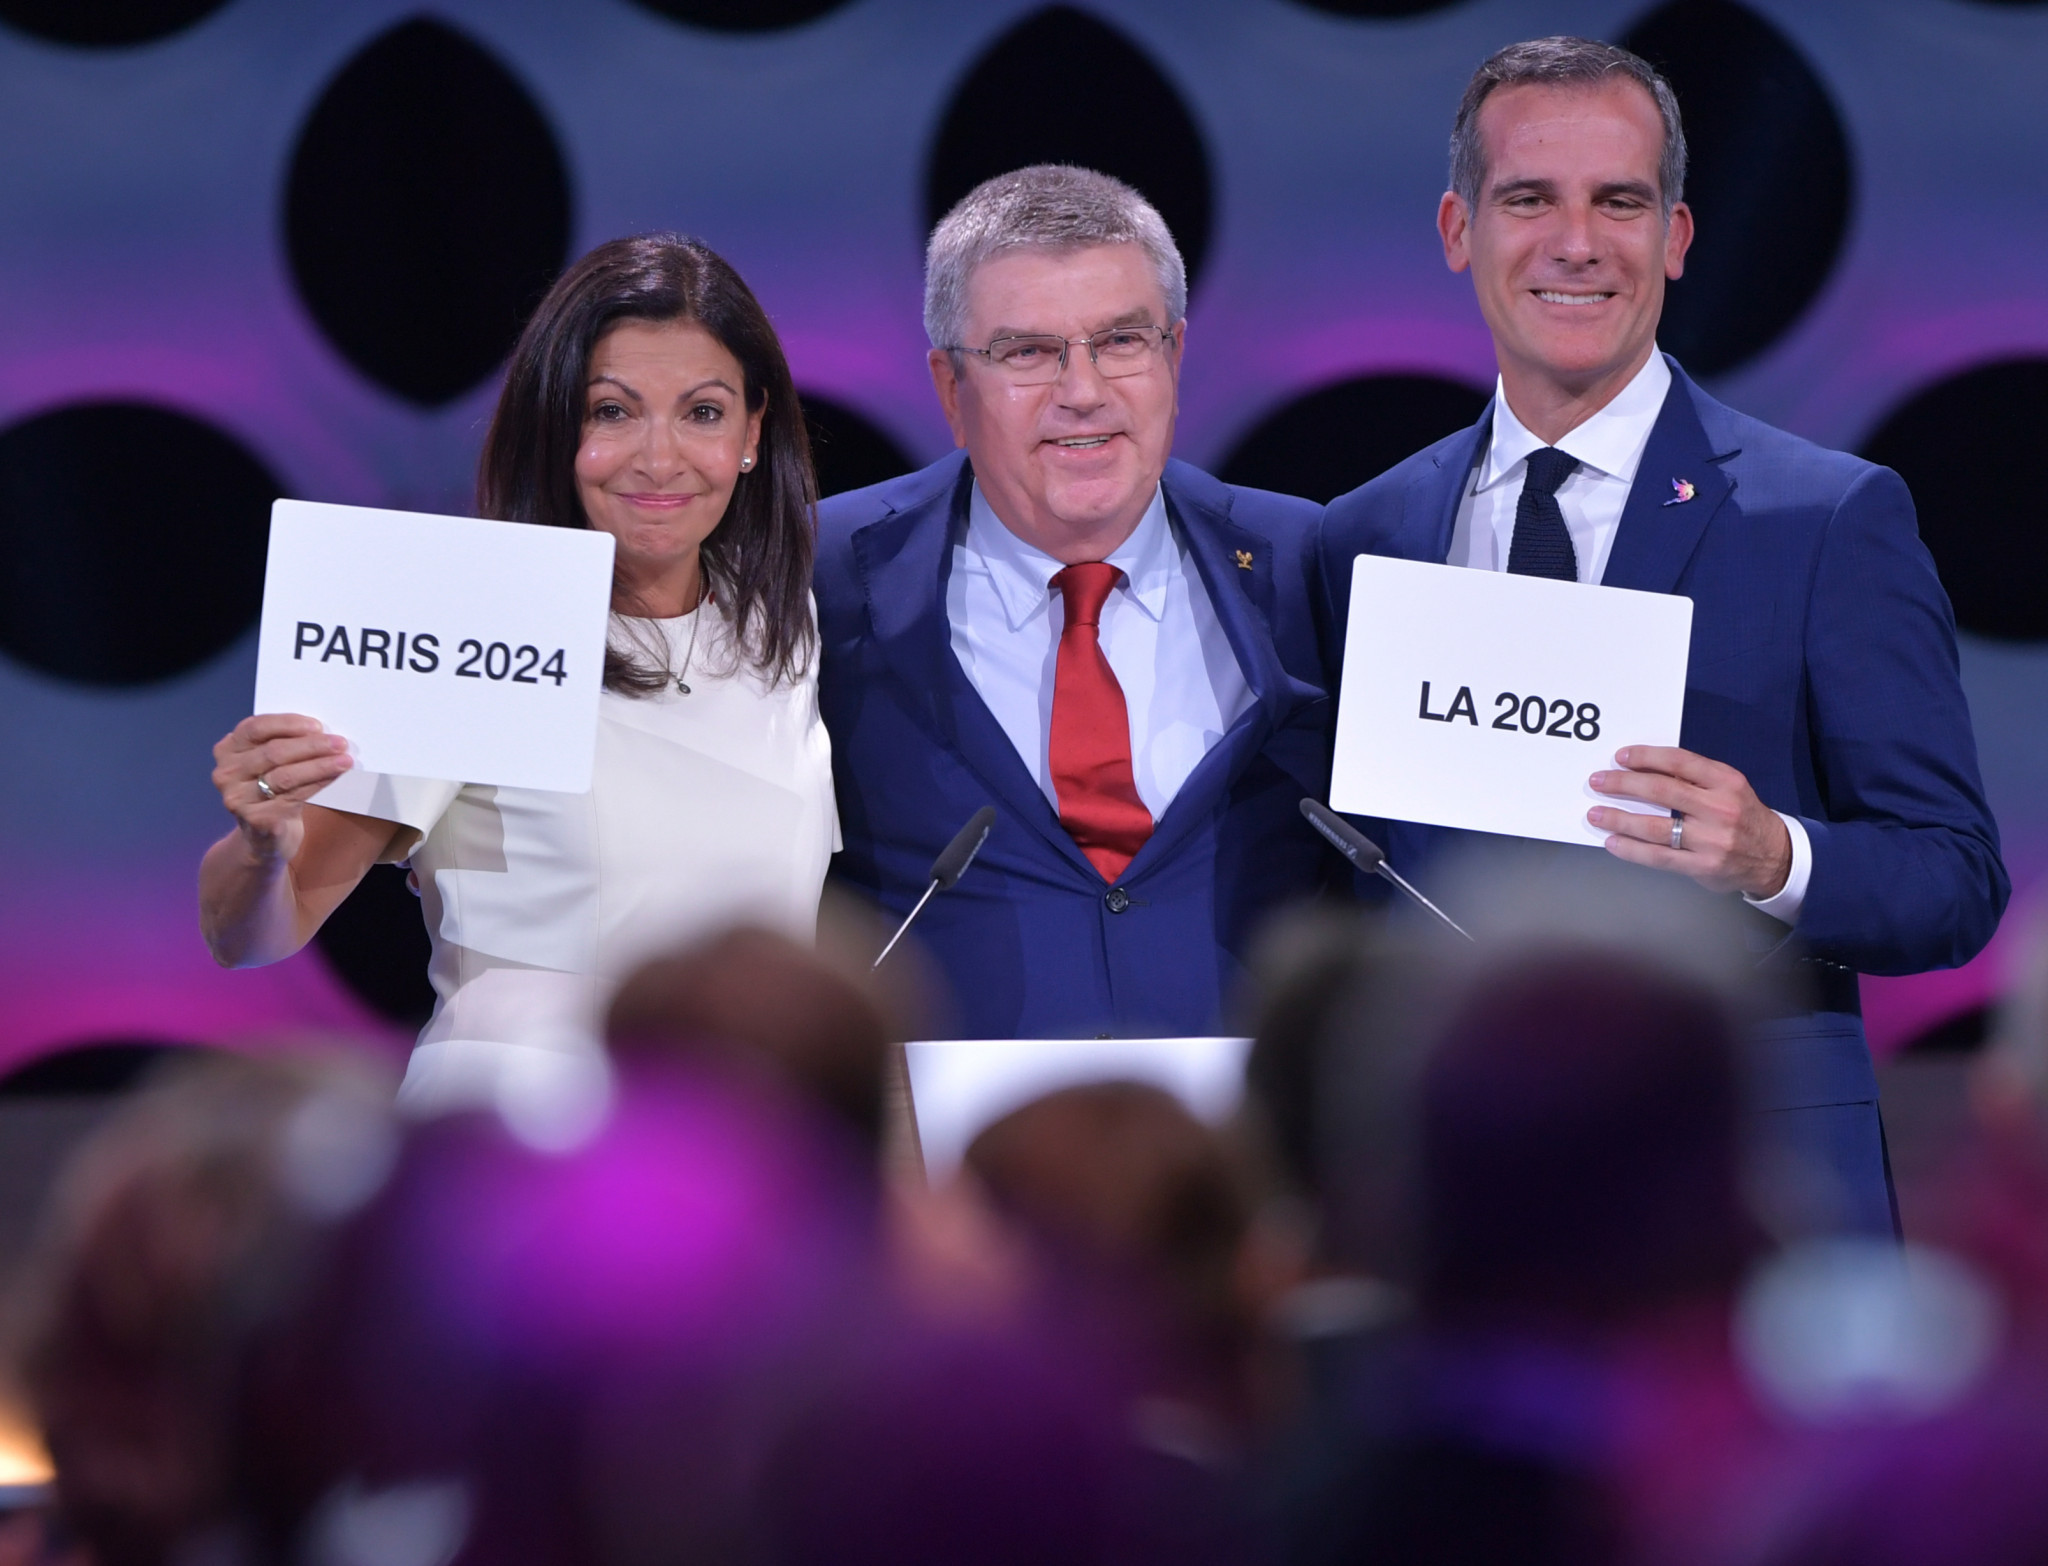 The double award of the Summer Olympics to Paris and Los Angeles concluded another accident-prone bidding process ©Getty Images